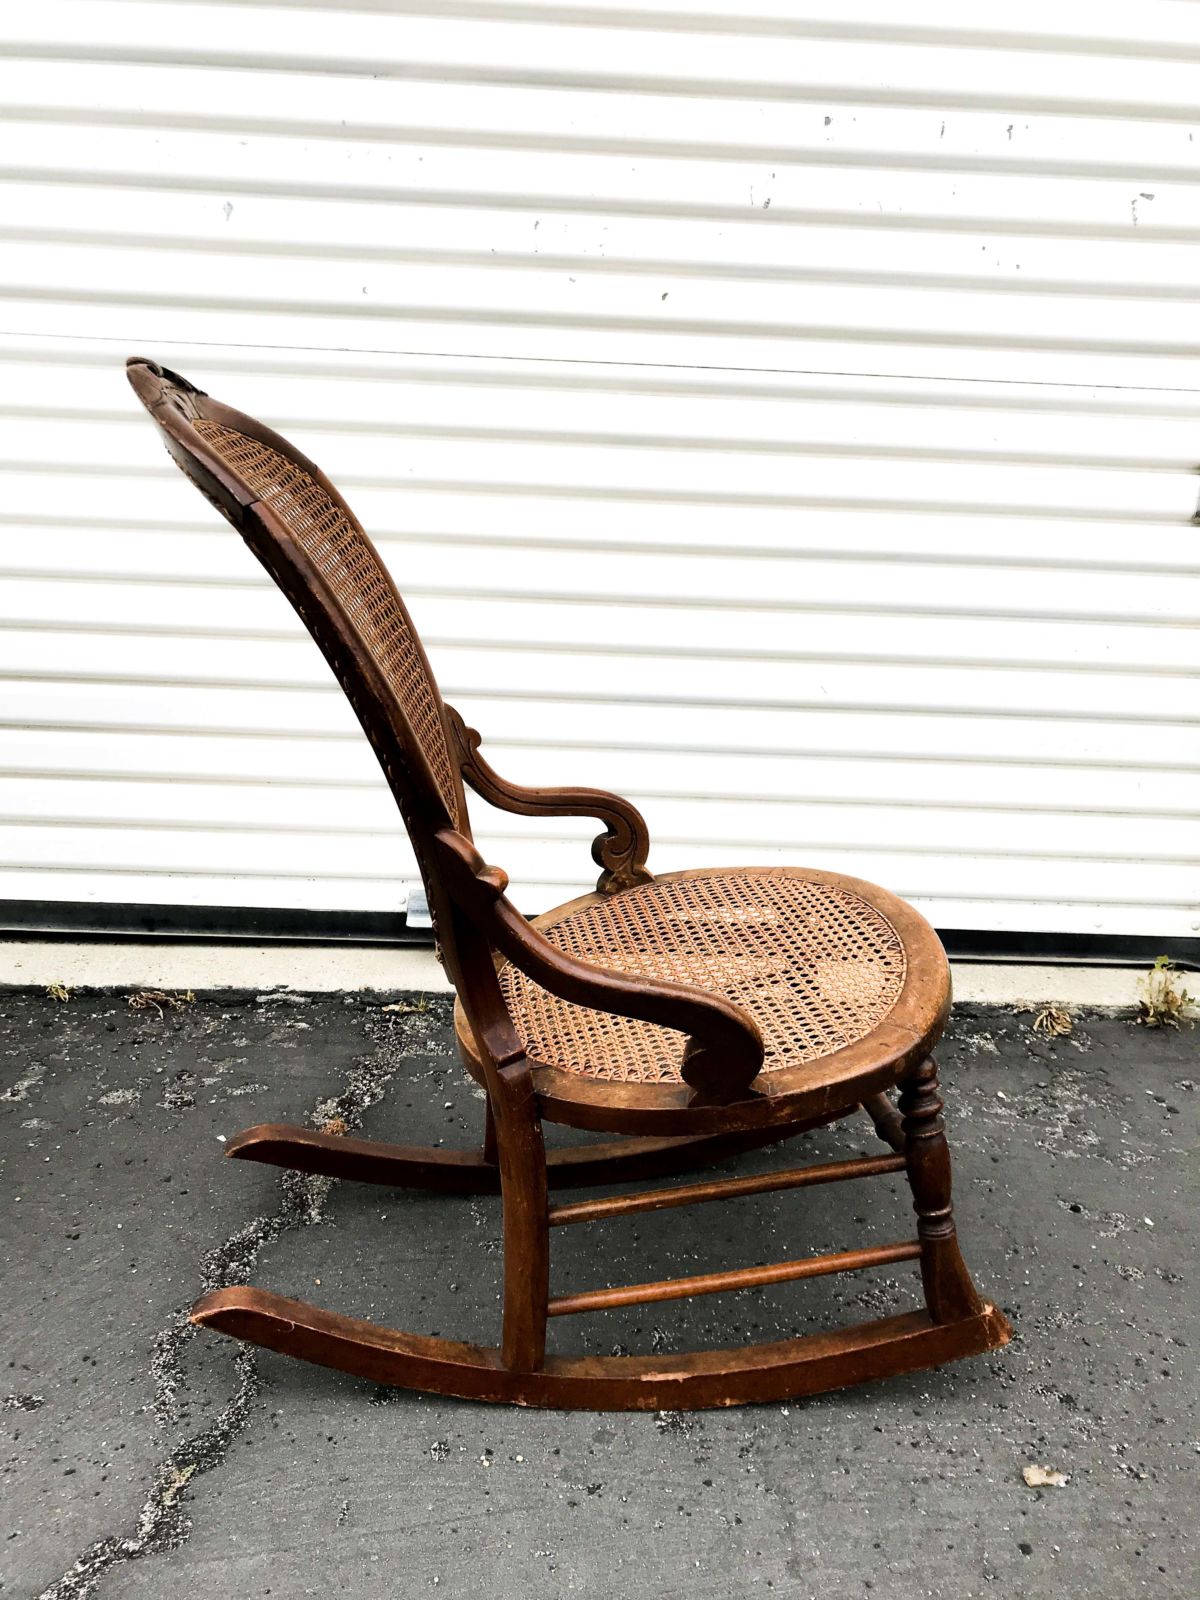 Antique Small Wood Carved Cane Rocking Chair